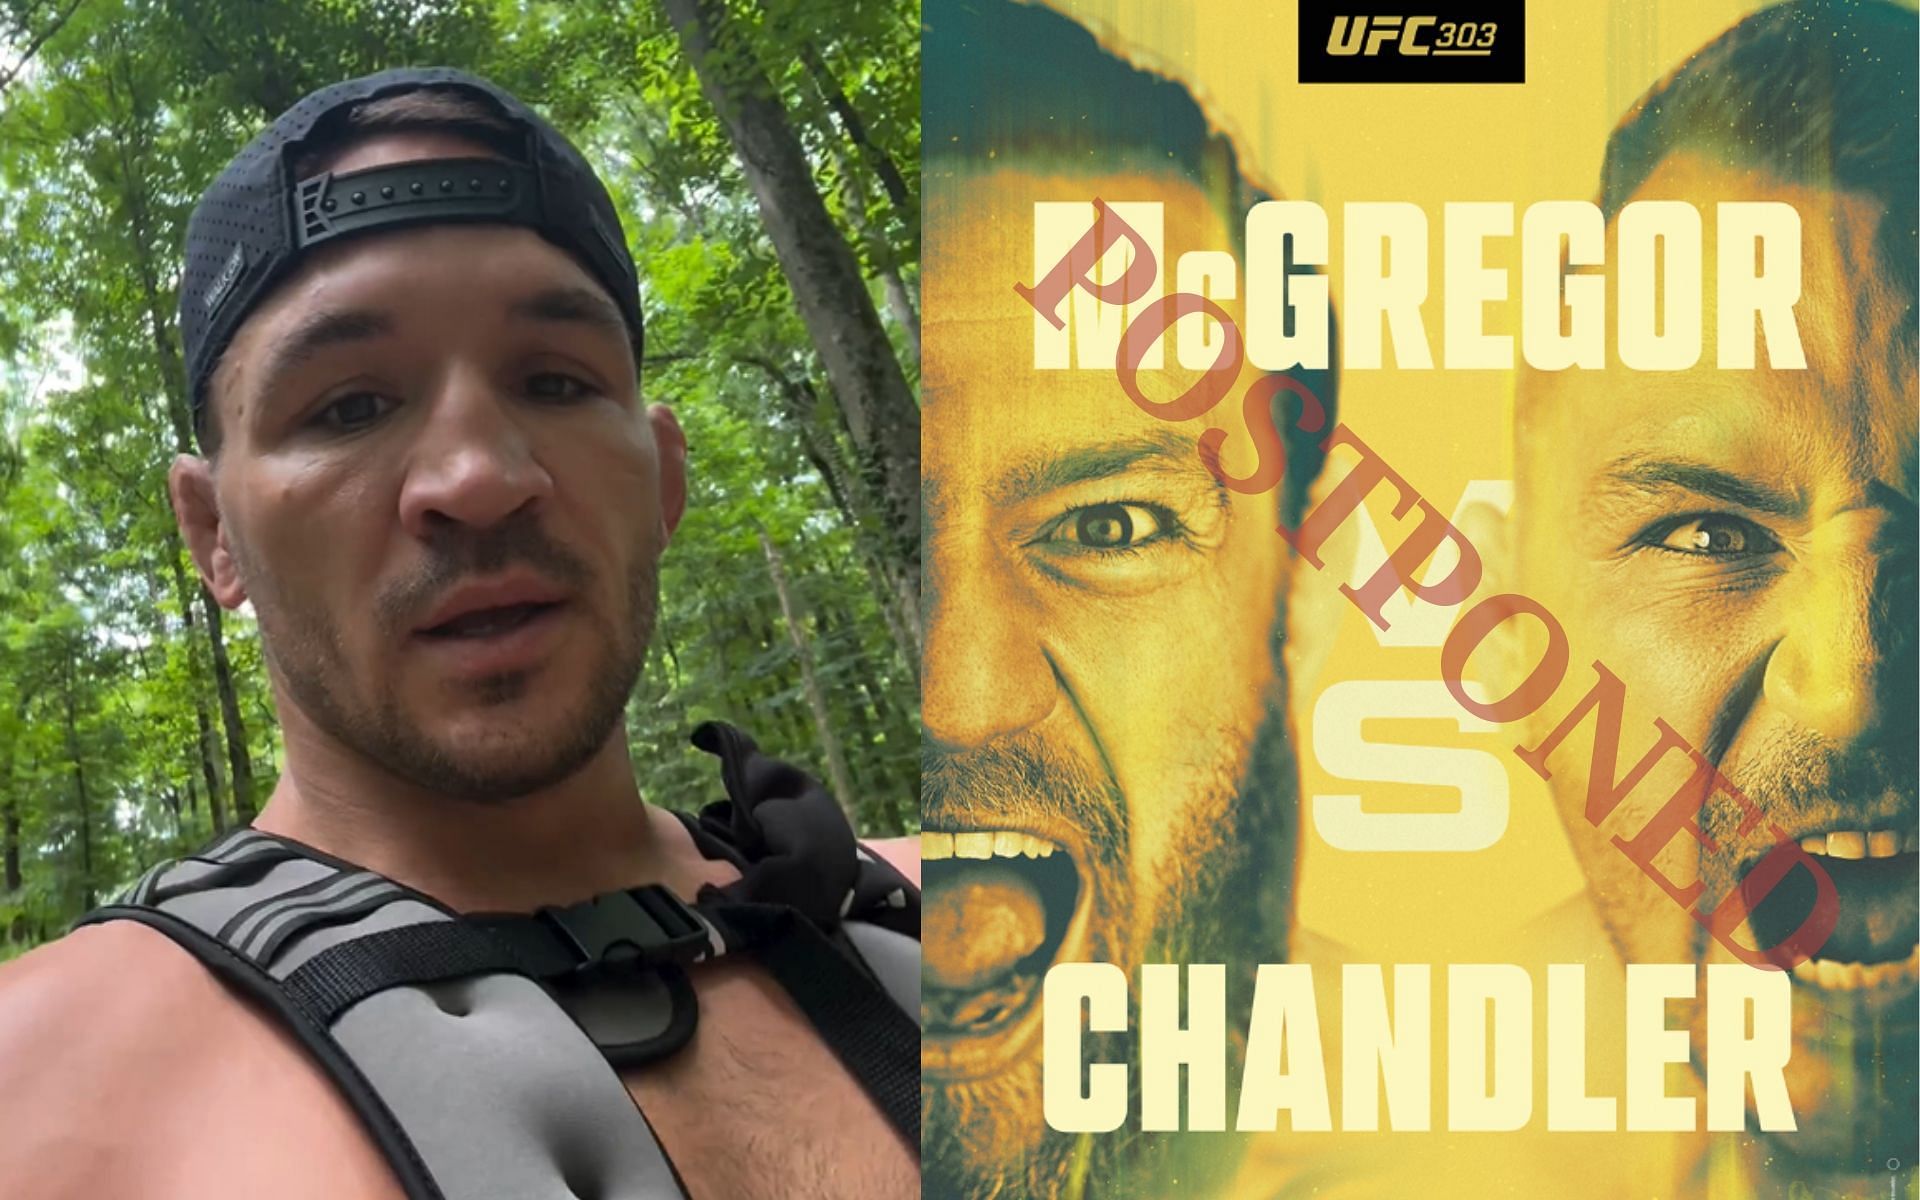 Michael Chandler (left) finally addresses the cancelation of the main event of UFC 303 (right). [Image credit: @mikechandlermma and @ufc on Instagram]